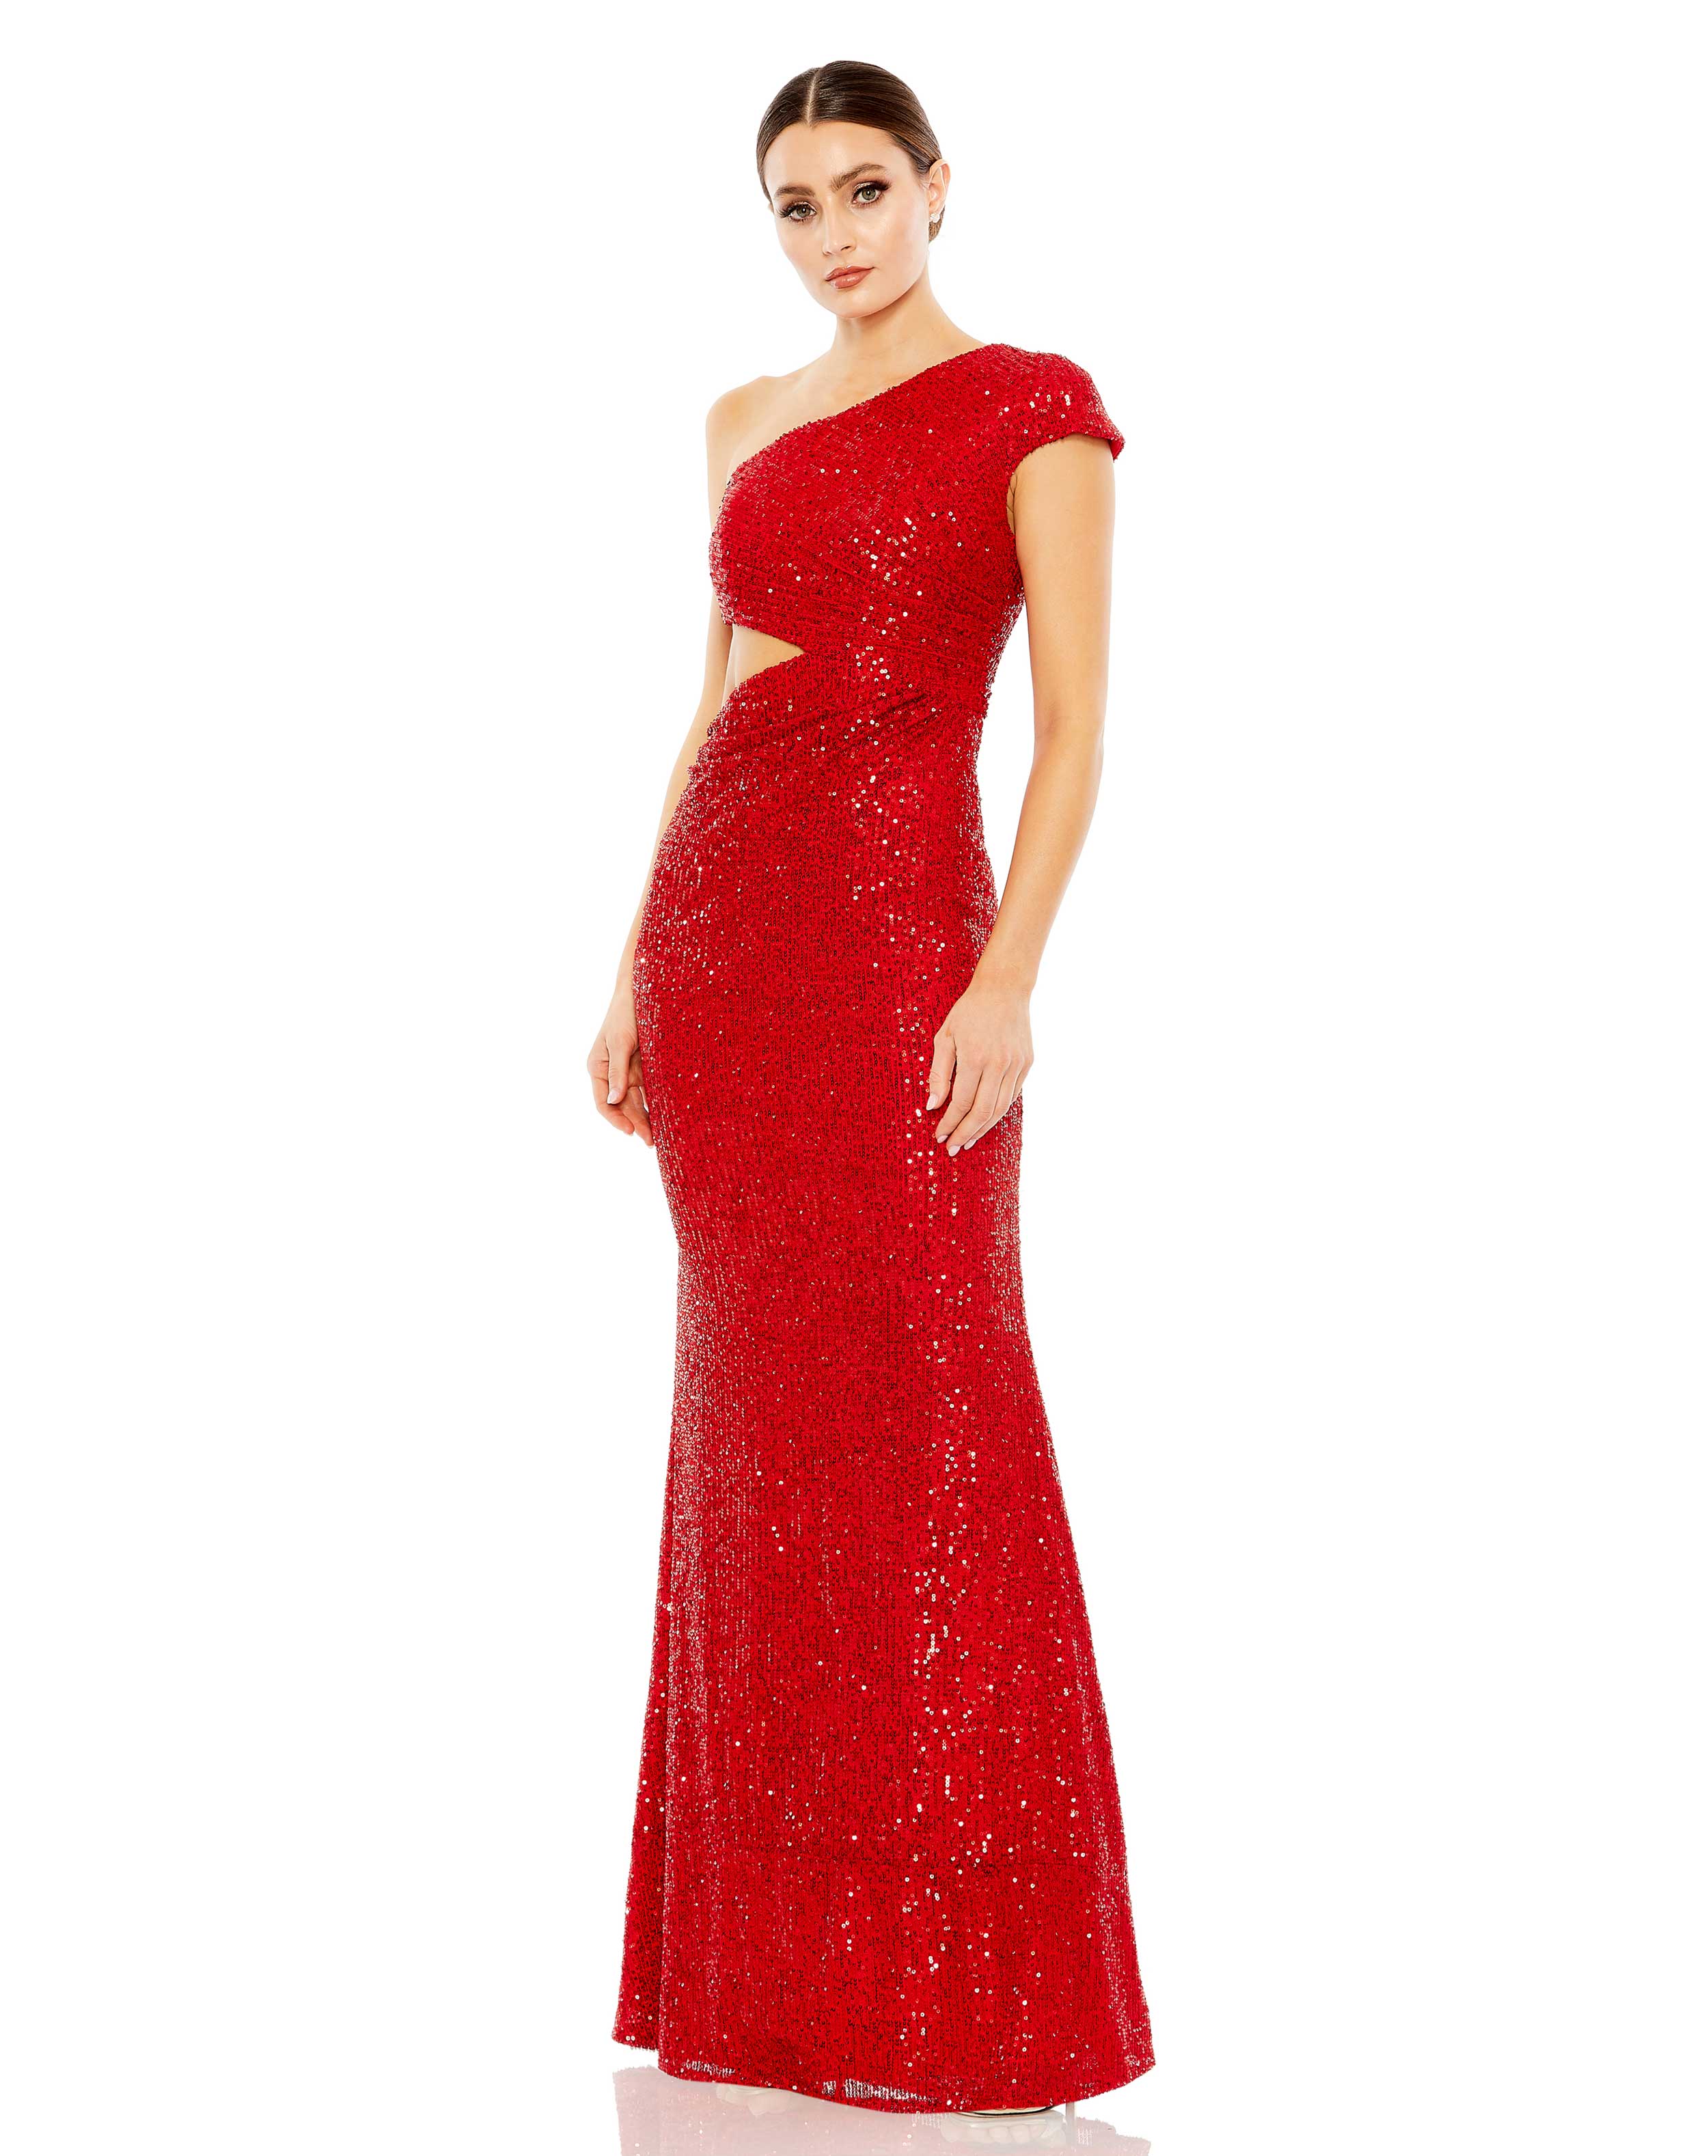 Sequined One Shoulder Cap Sleeve Cut Out Gown - FINAL SALE